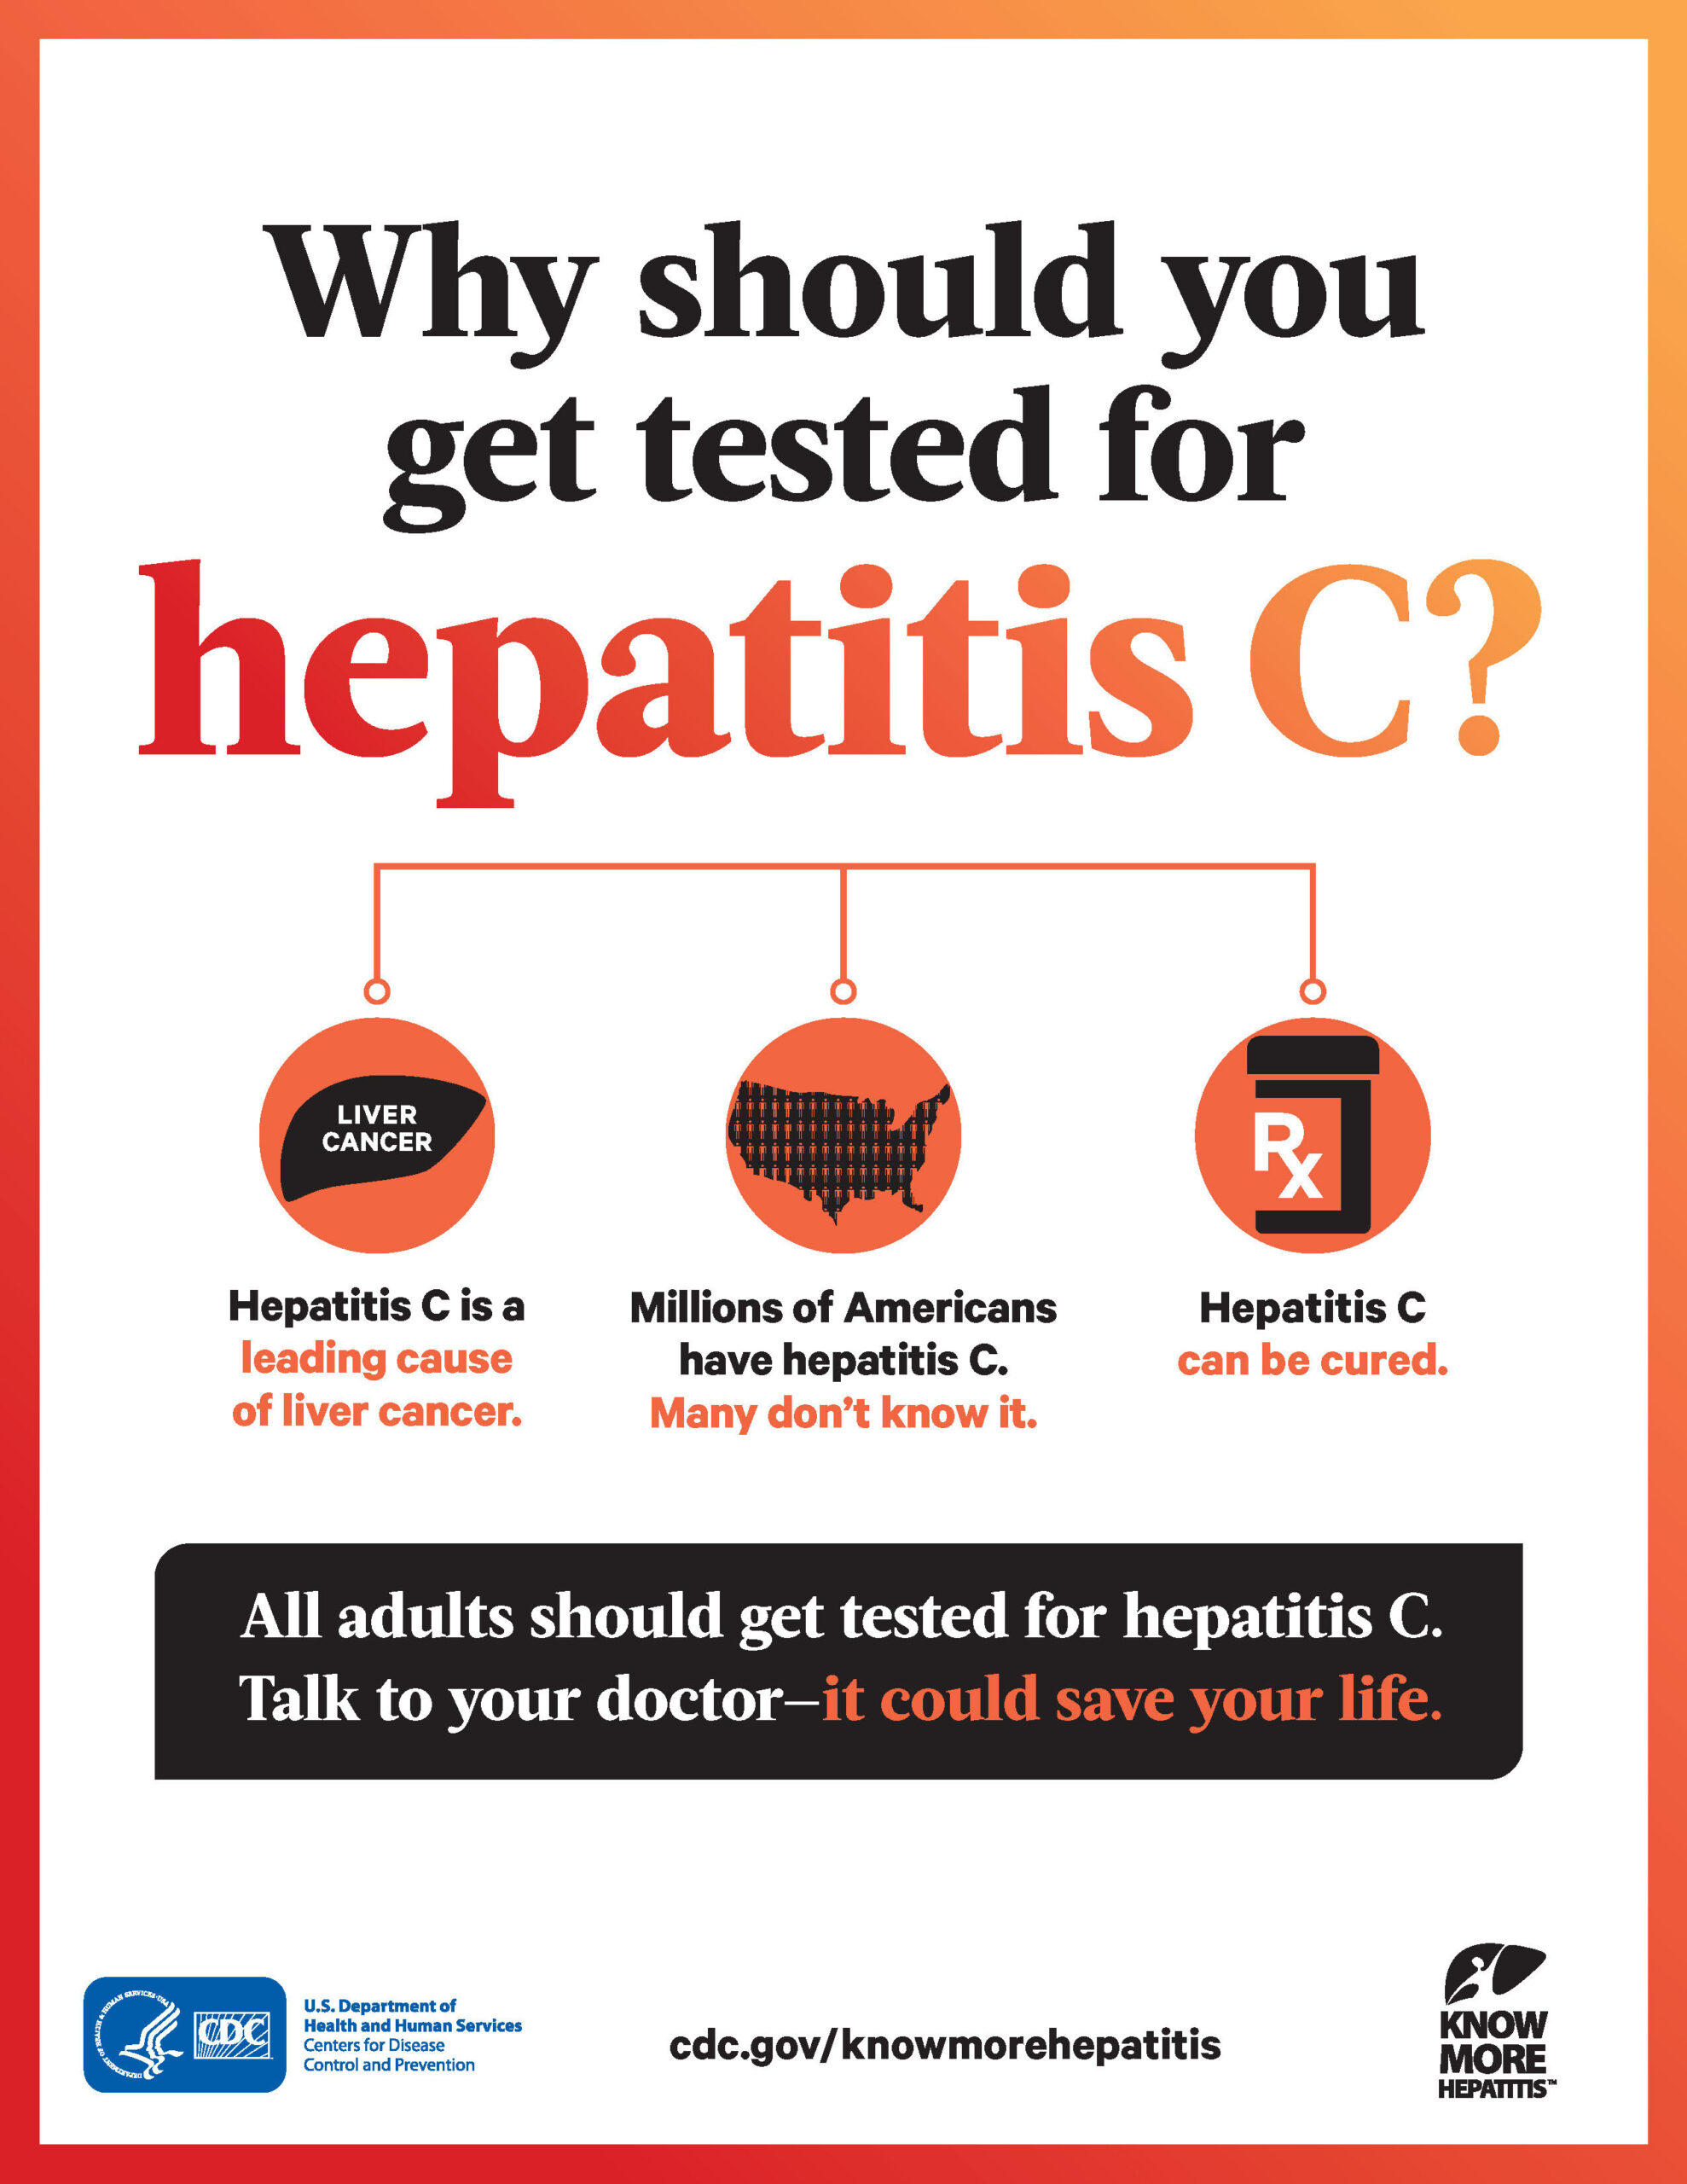 Infographic: Millions of Americans are living with hepatitis C. Many don’t know it because the disease often has no symptoms. CDC recommends all adults get tested for hepatitis C, so talk to your doctor — it could save your life. https://www.cdc.gov/knowmorehepatitis/